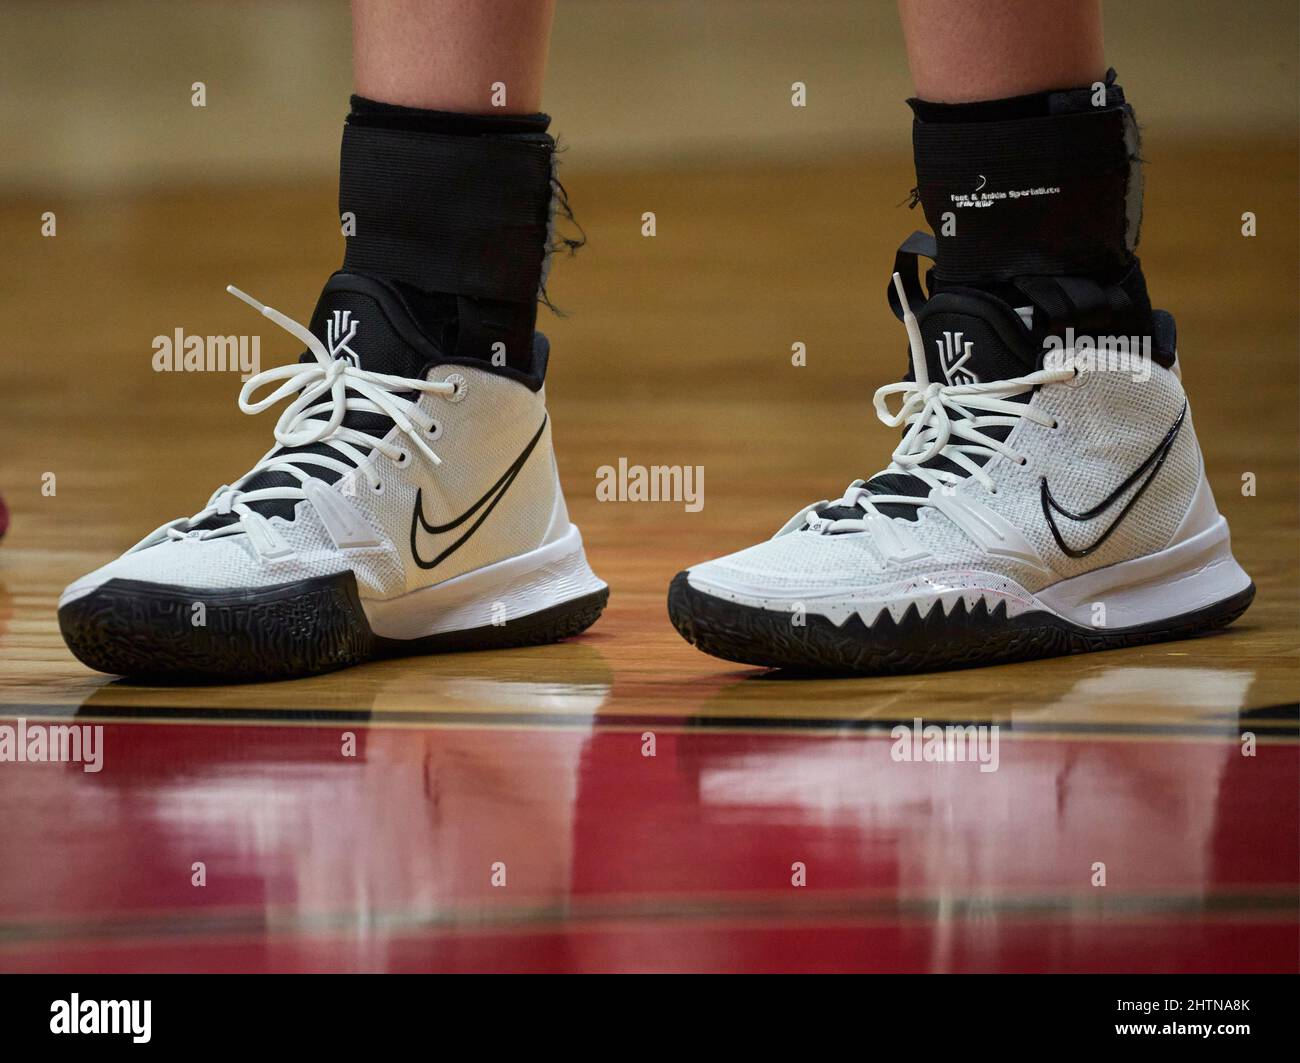 Piscataway, New Jersey, USA. 24th Feb, 2022. The Nike shoes worn by Iowa  Hawkeyes forward Monika Czinano (25) during a game against the Rutgers  Scarlet Knights at Jersey Mikes Arena in Piscataway,